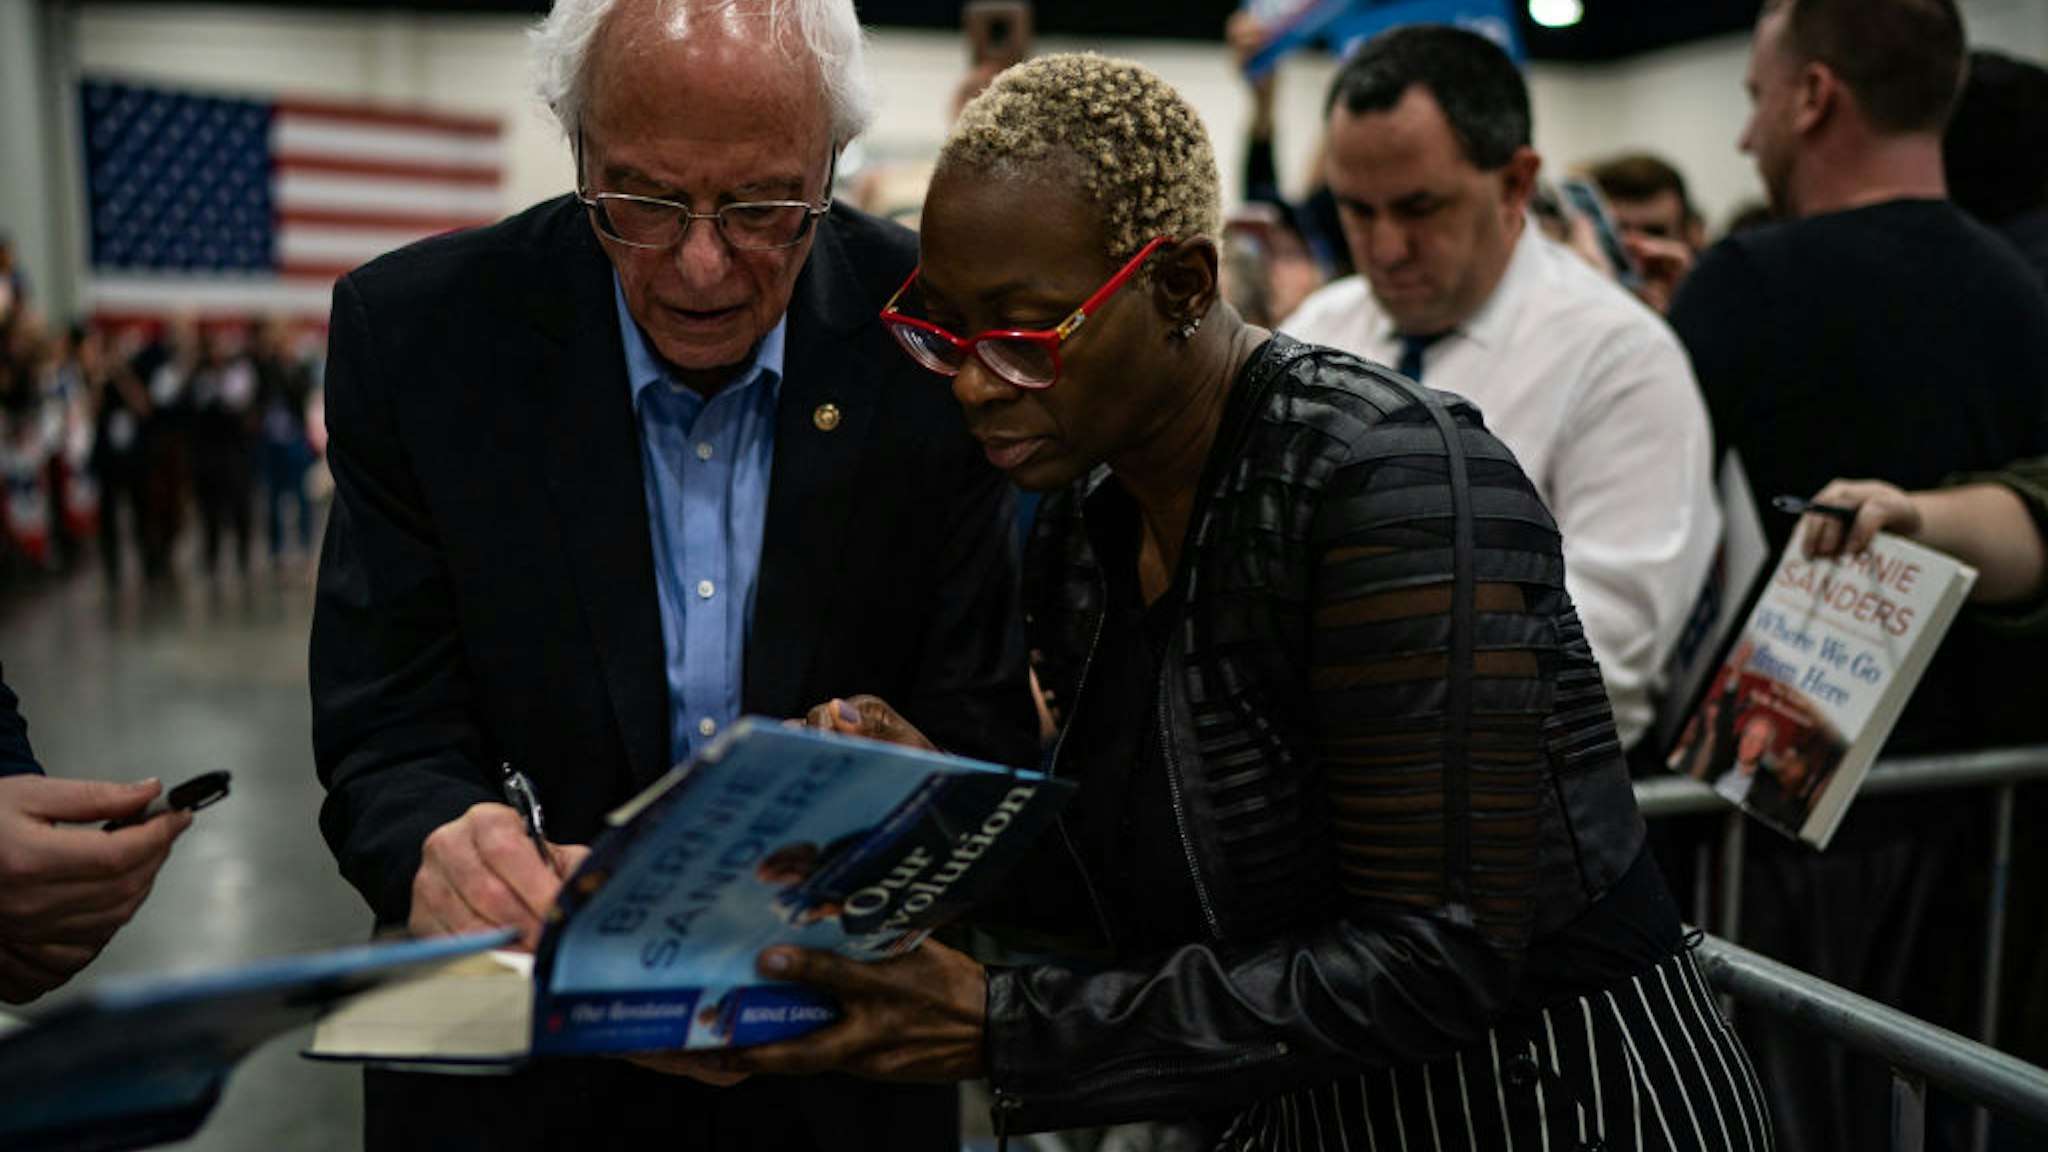 Former Ohio state Sen. Nina Turner holds a book for Sen. Bernie Sanders, I-Vt., 2020 Democratic Presidential Candidate to sign after speaking during a rally at the Myrtle Beach Convention Center on Wednesday, February 26, 2020 in Myrtle Beach, SC.